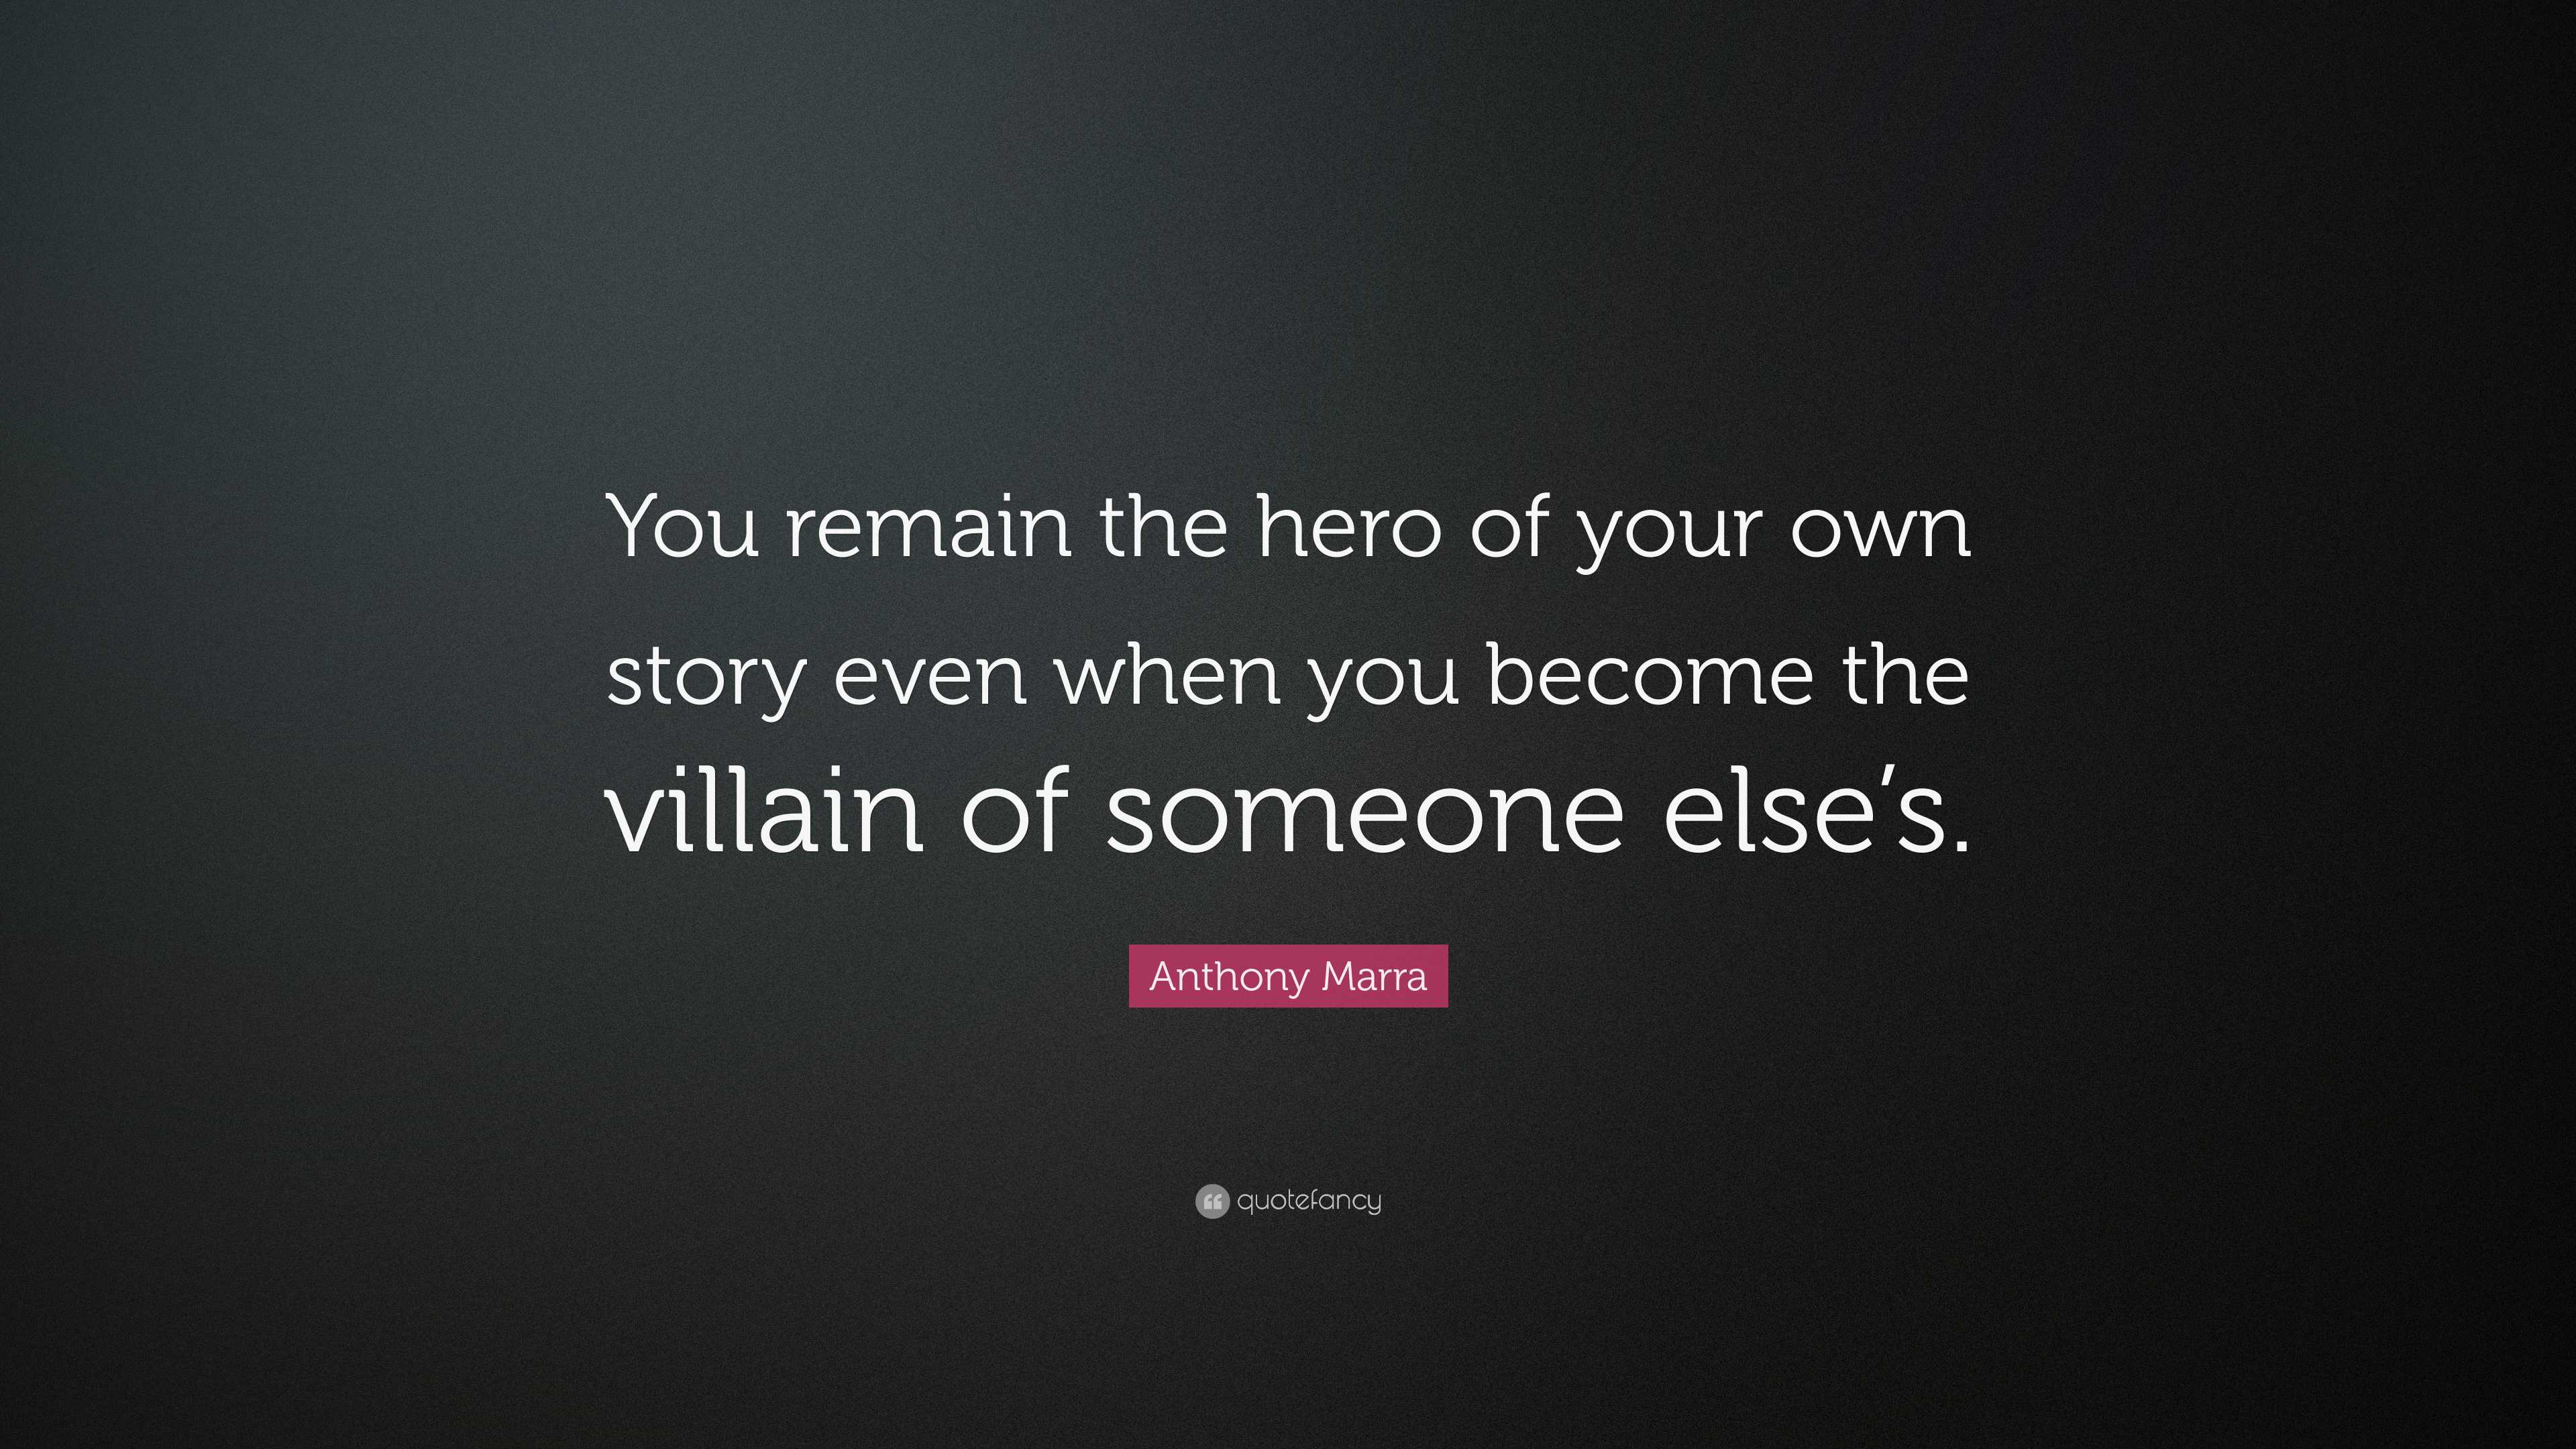 Anthony Marra Quote: “You remain the hero of your own story even when ...